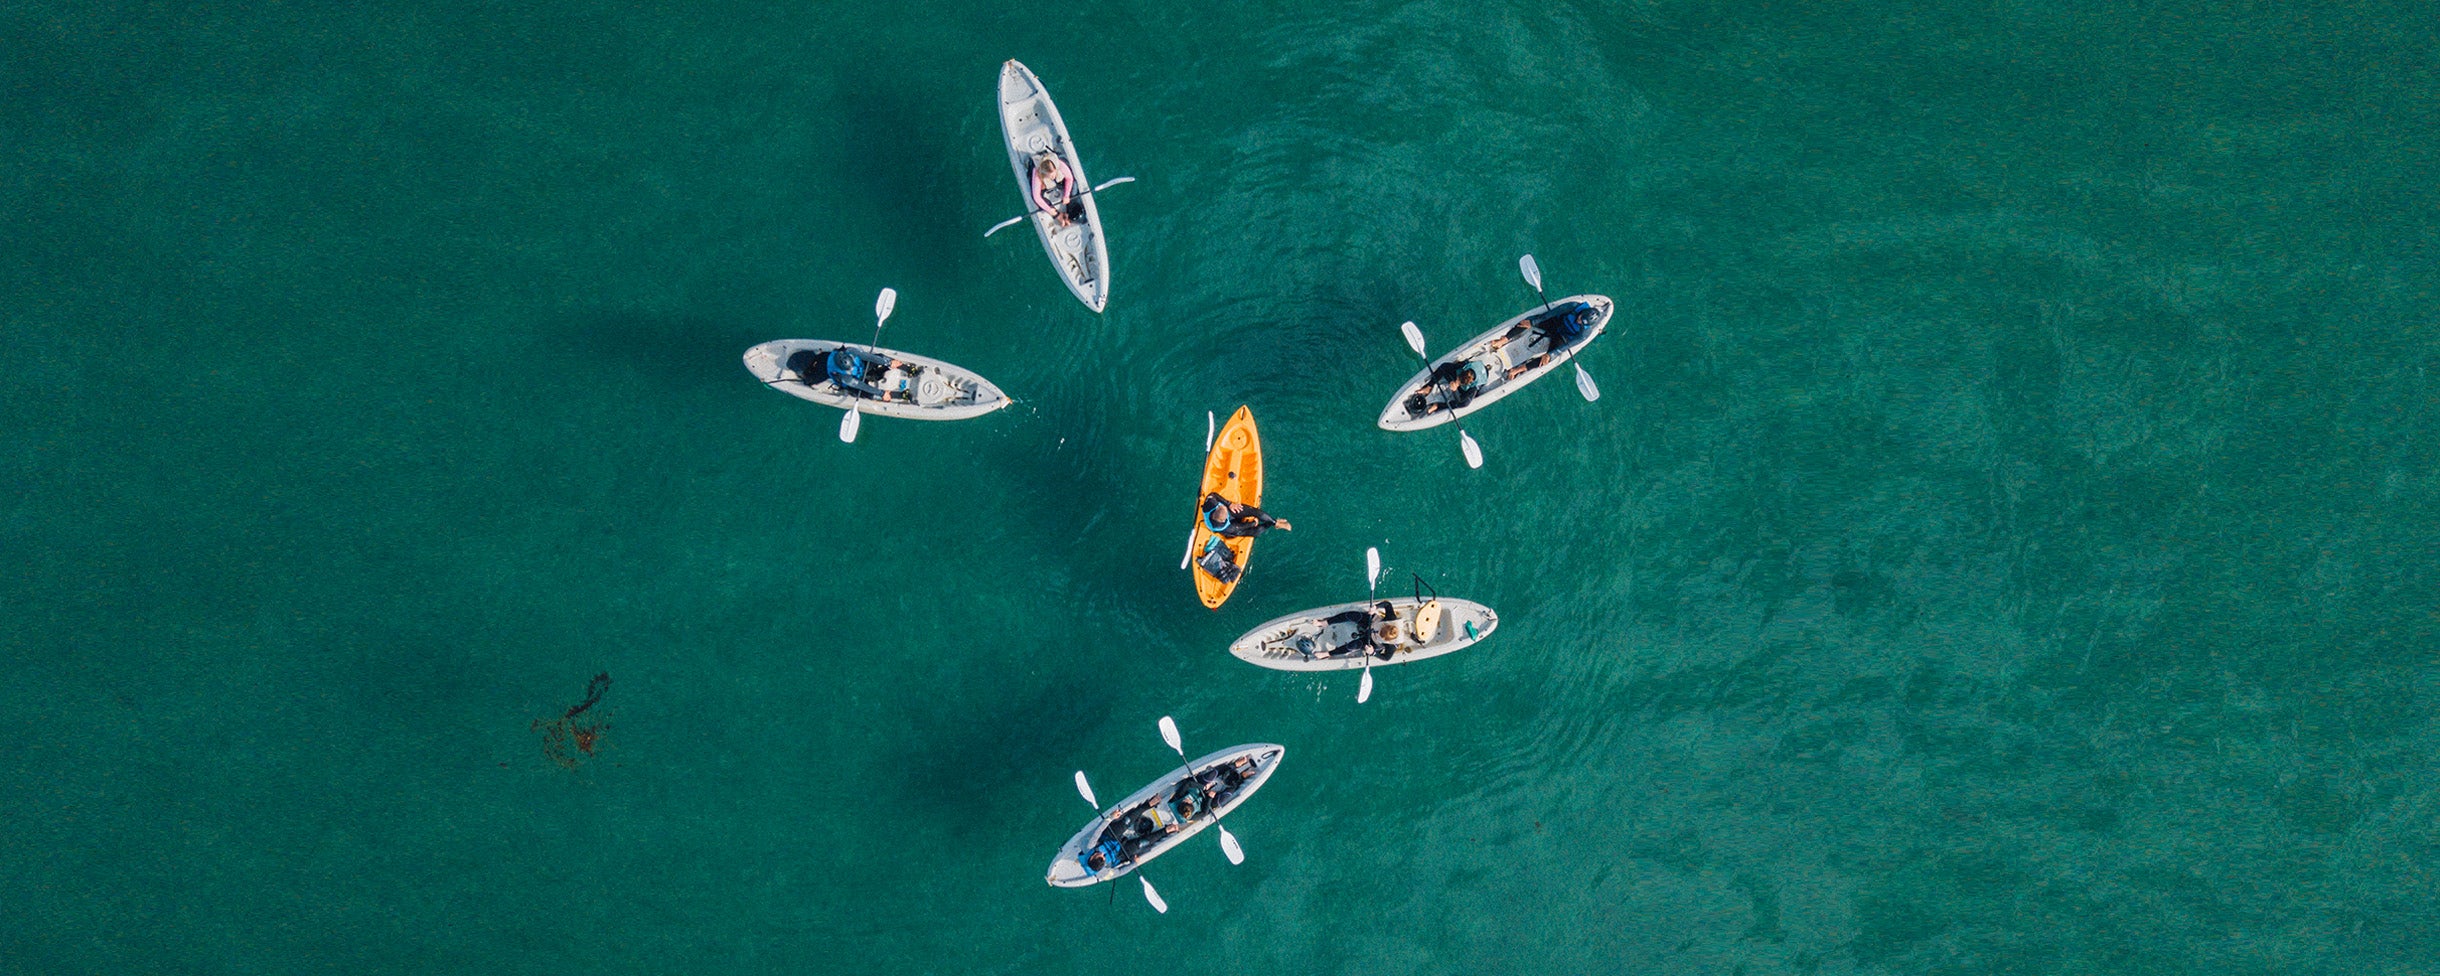 Drone shot of Everyday California’s Sea Cave Kayak Tour in the La Jolla Shores Ecological Reserve and Marine Park